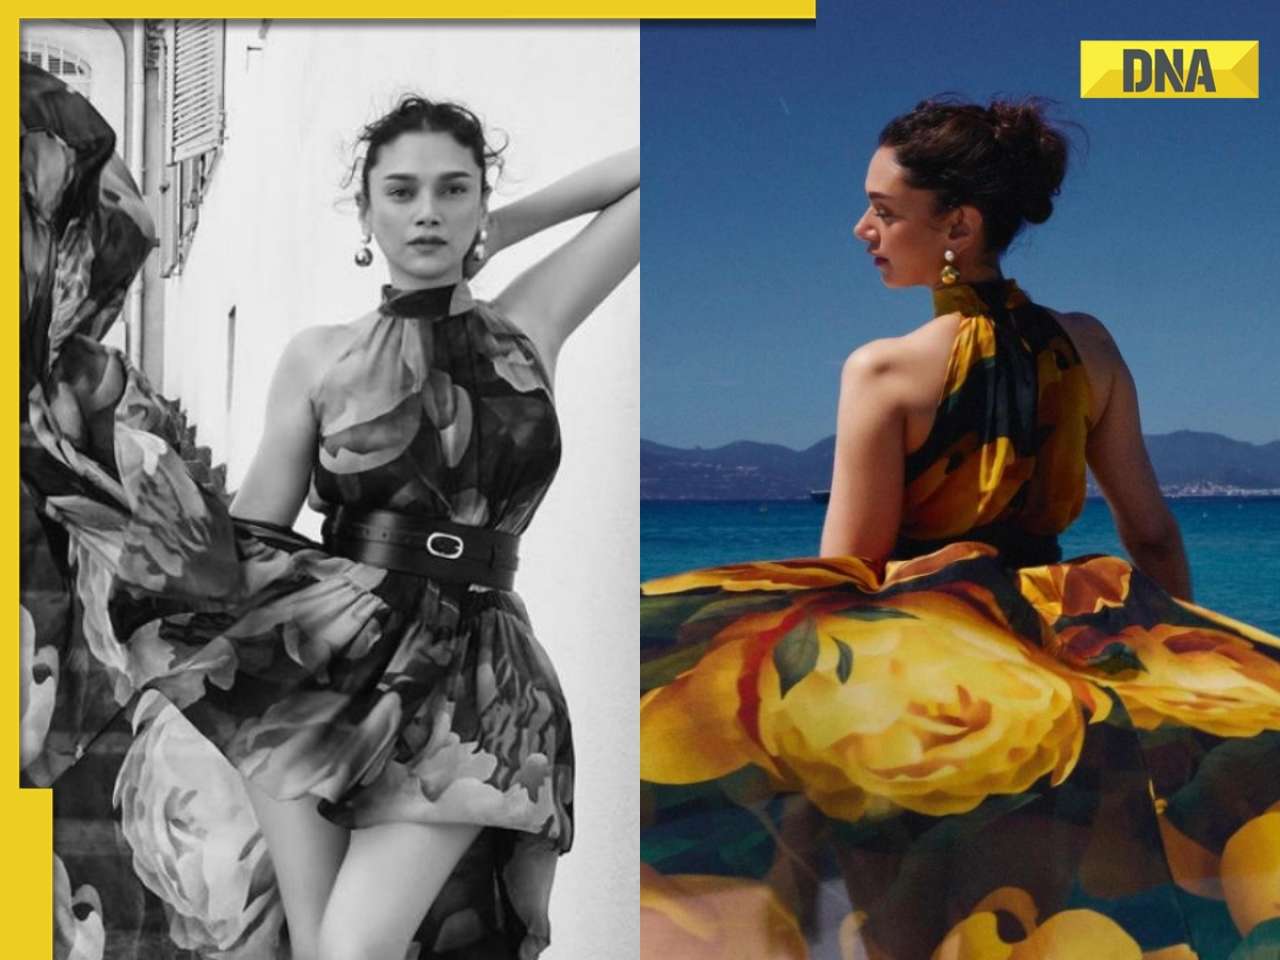 In pics: Aditi Rao Hydari being 'pocket full of sunshine' at Cannes in floral dress, fans call her 'born aesthetic'